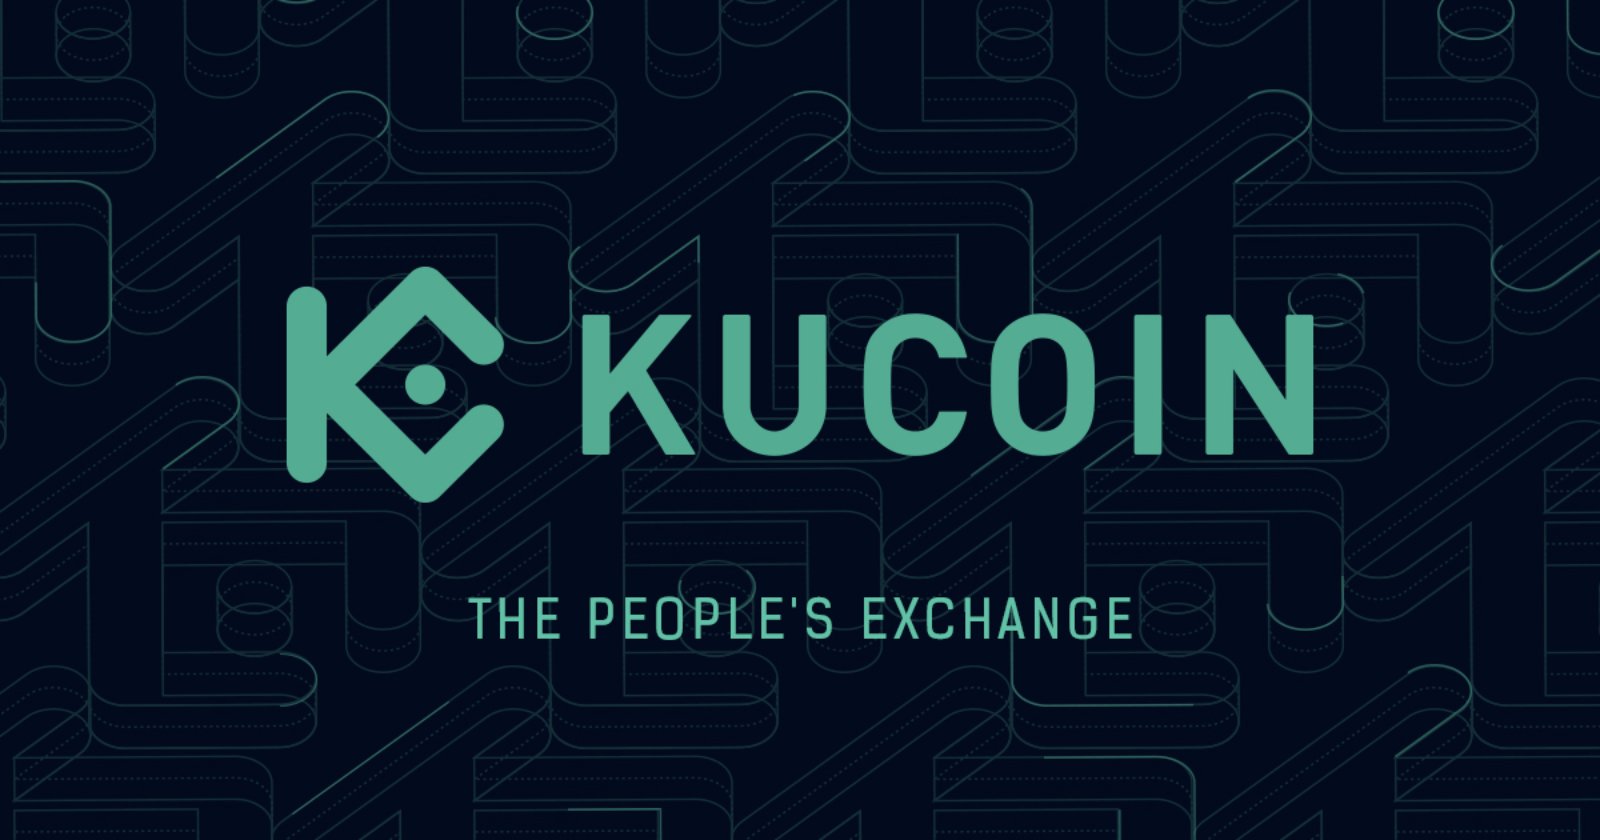 is kucoin a decentralized exchange